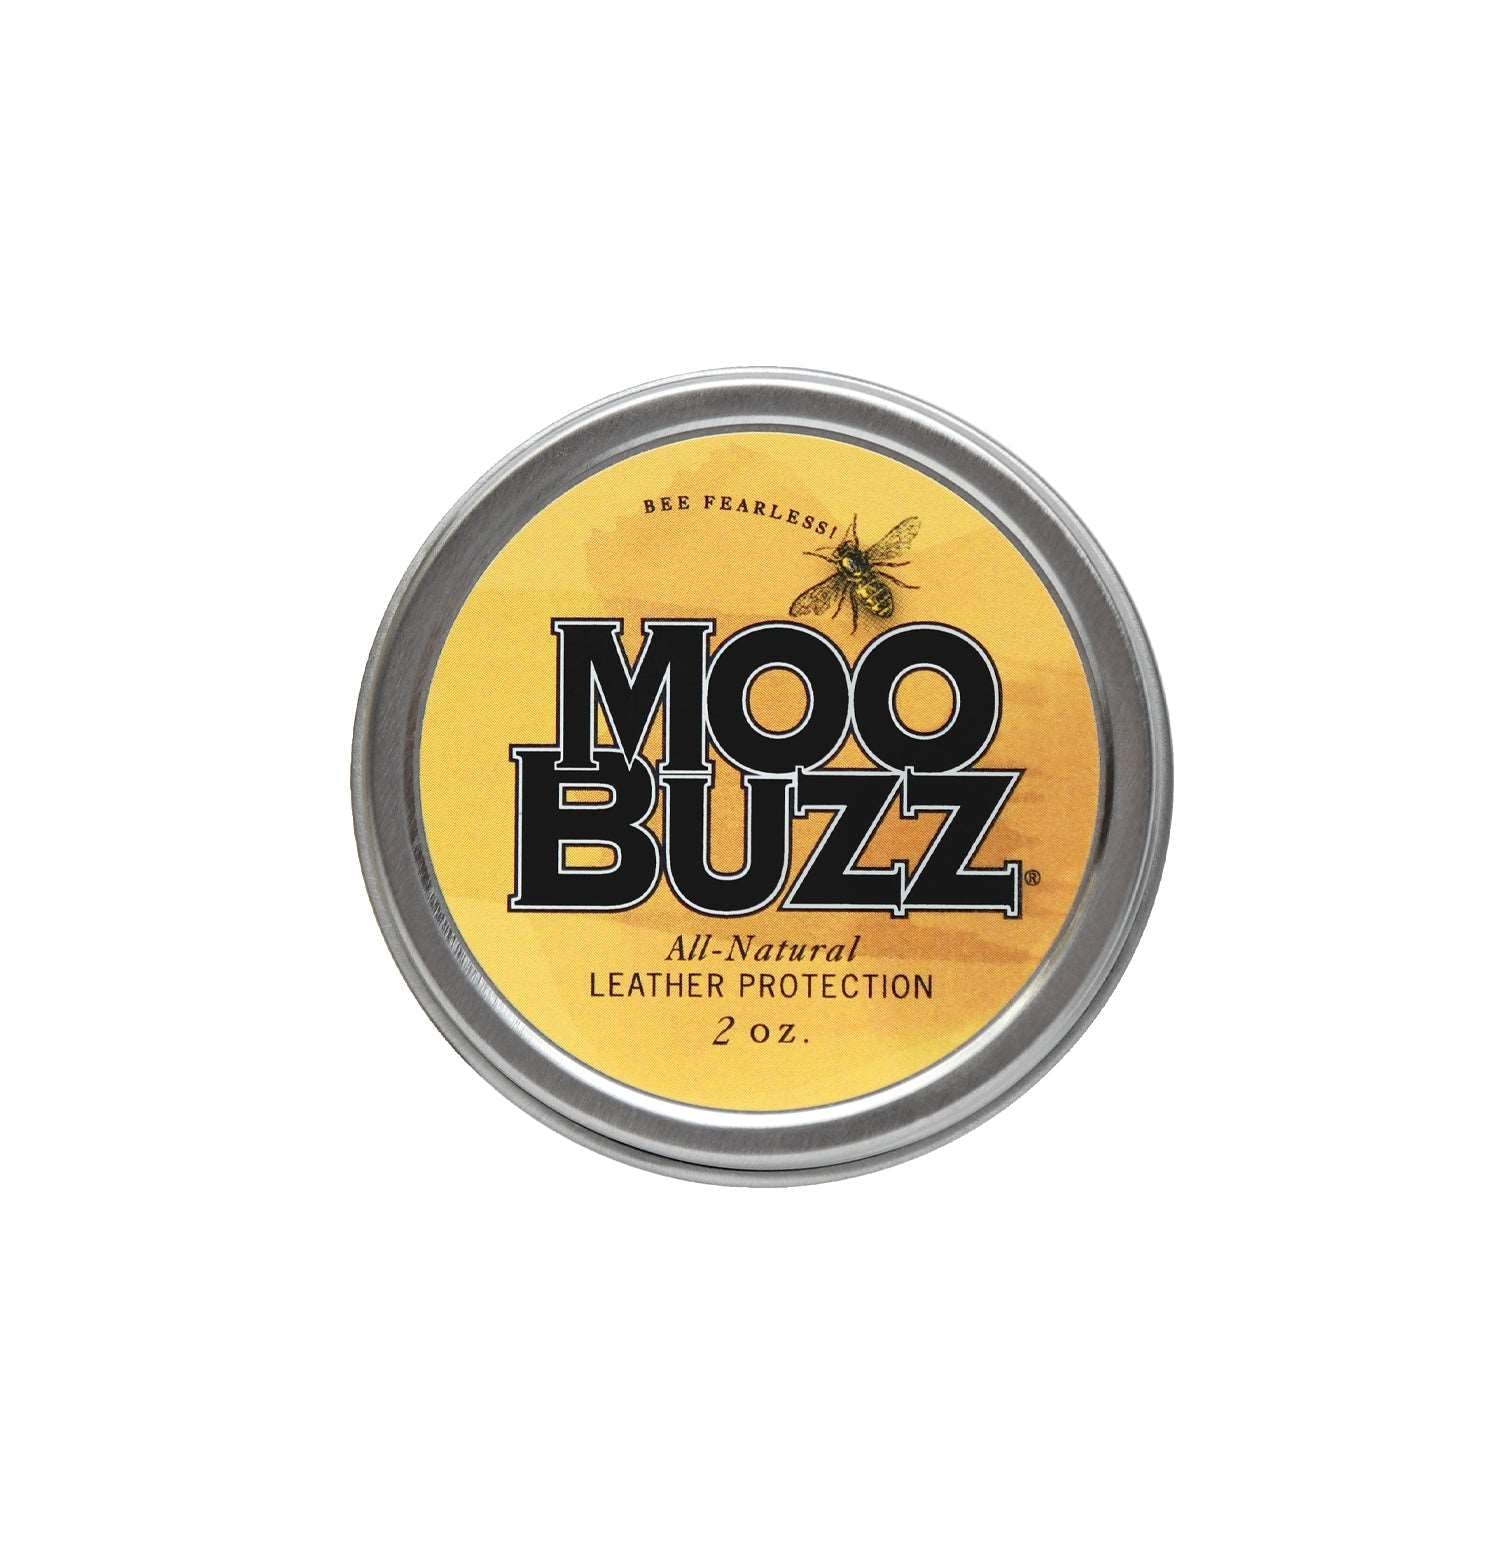 Closed travel sized tin of MooBuzz all-natural leather protection